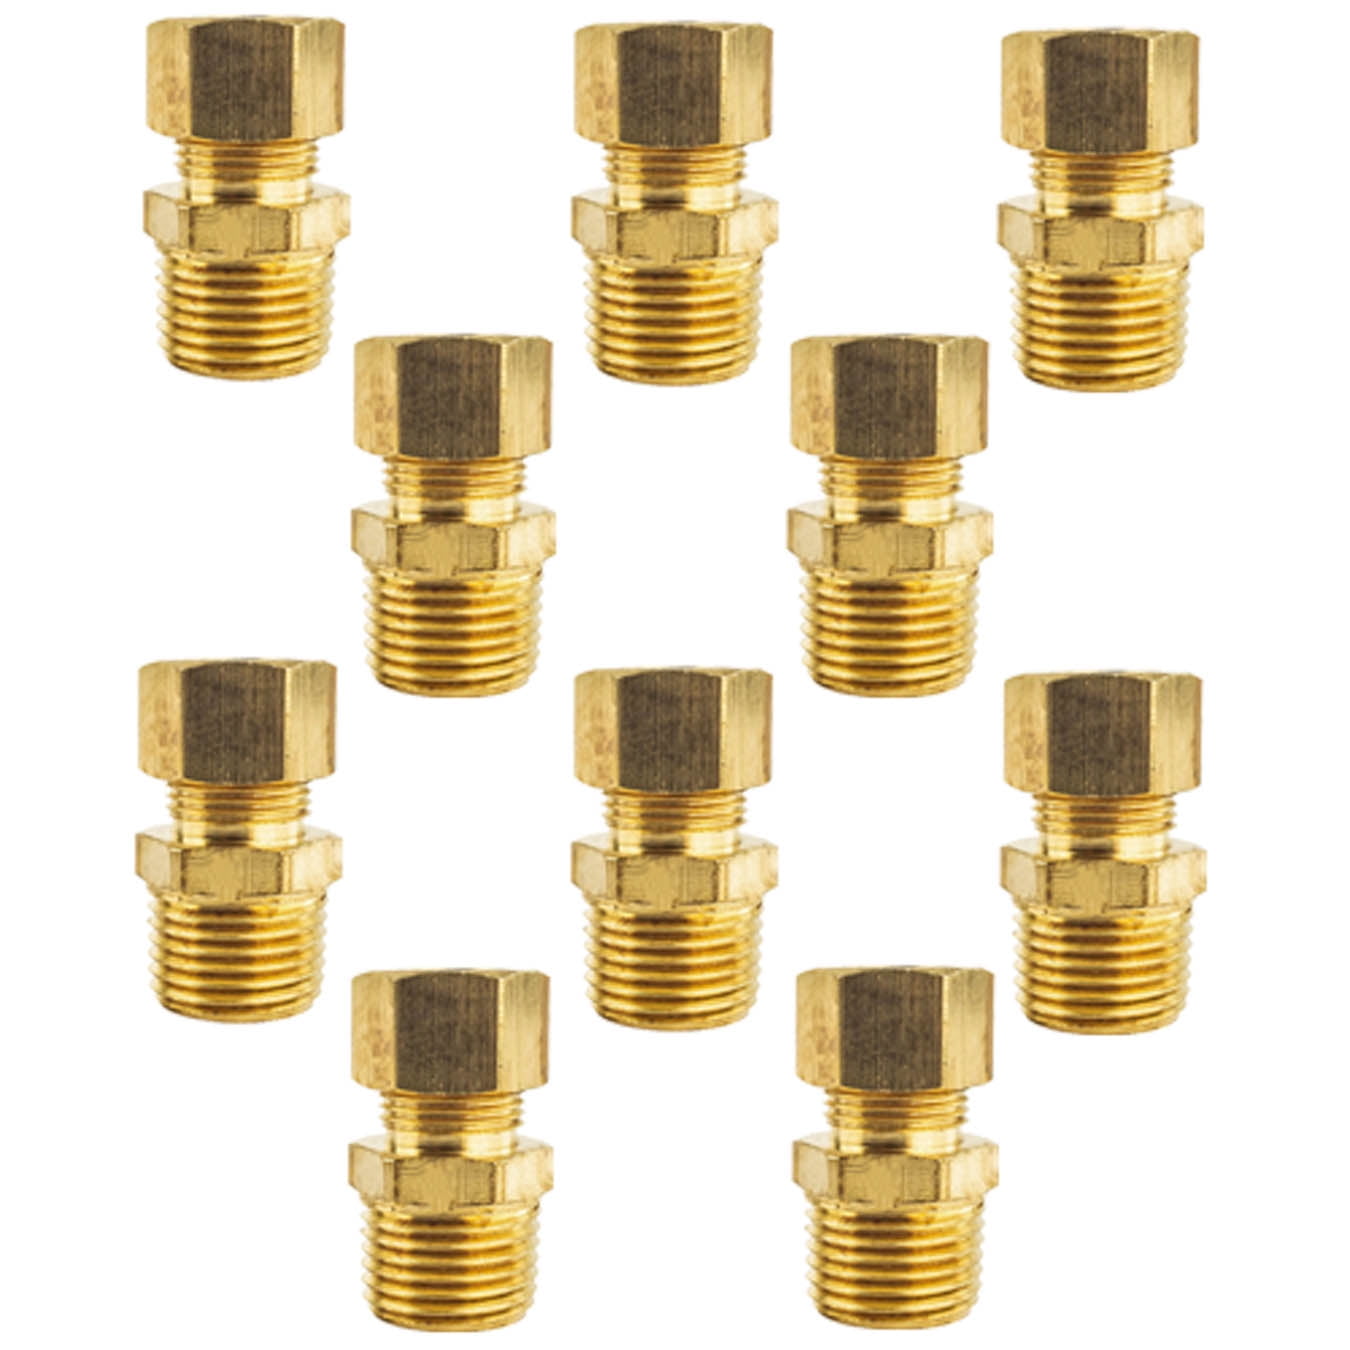 5 Pack 1/2" x 1/2" Male NPT Connector Brass Compression Fitting for 1/2" OD Tube 